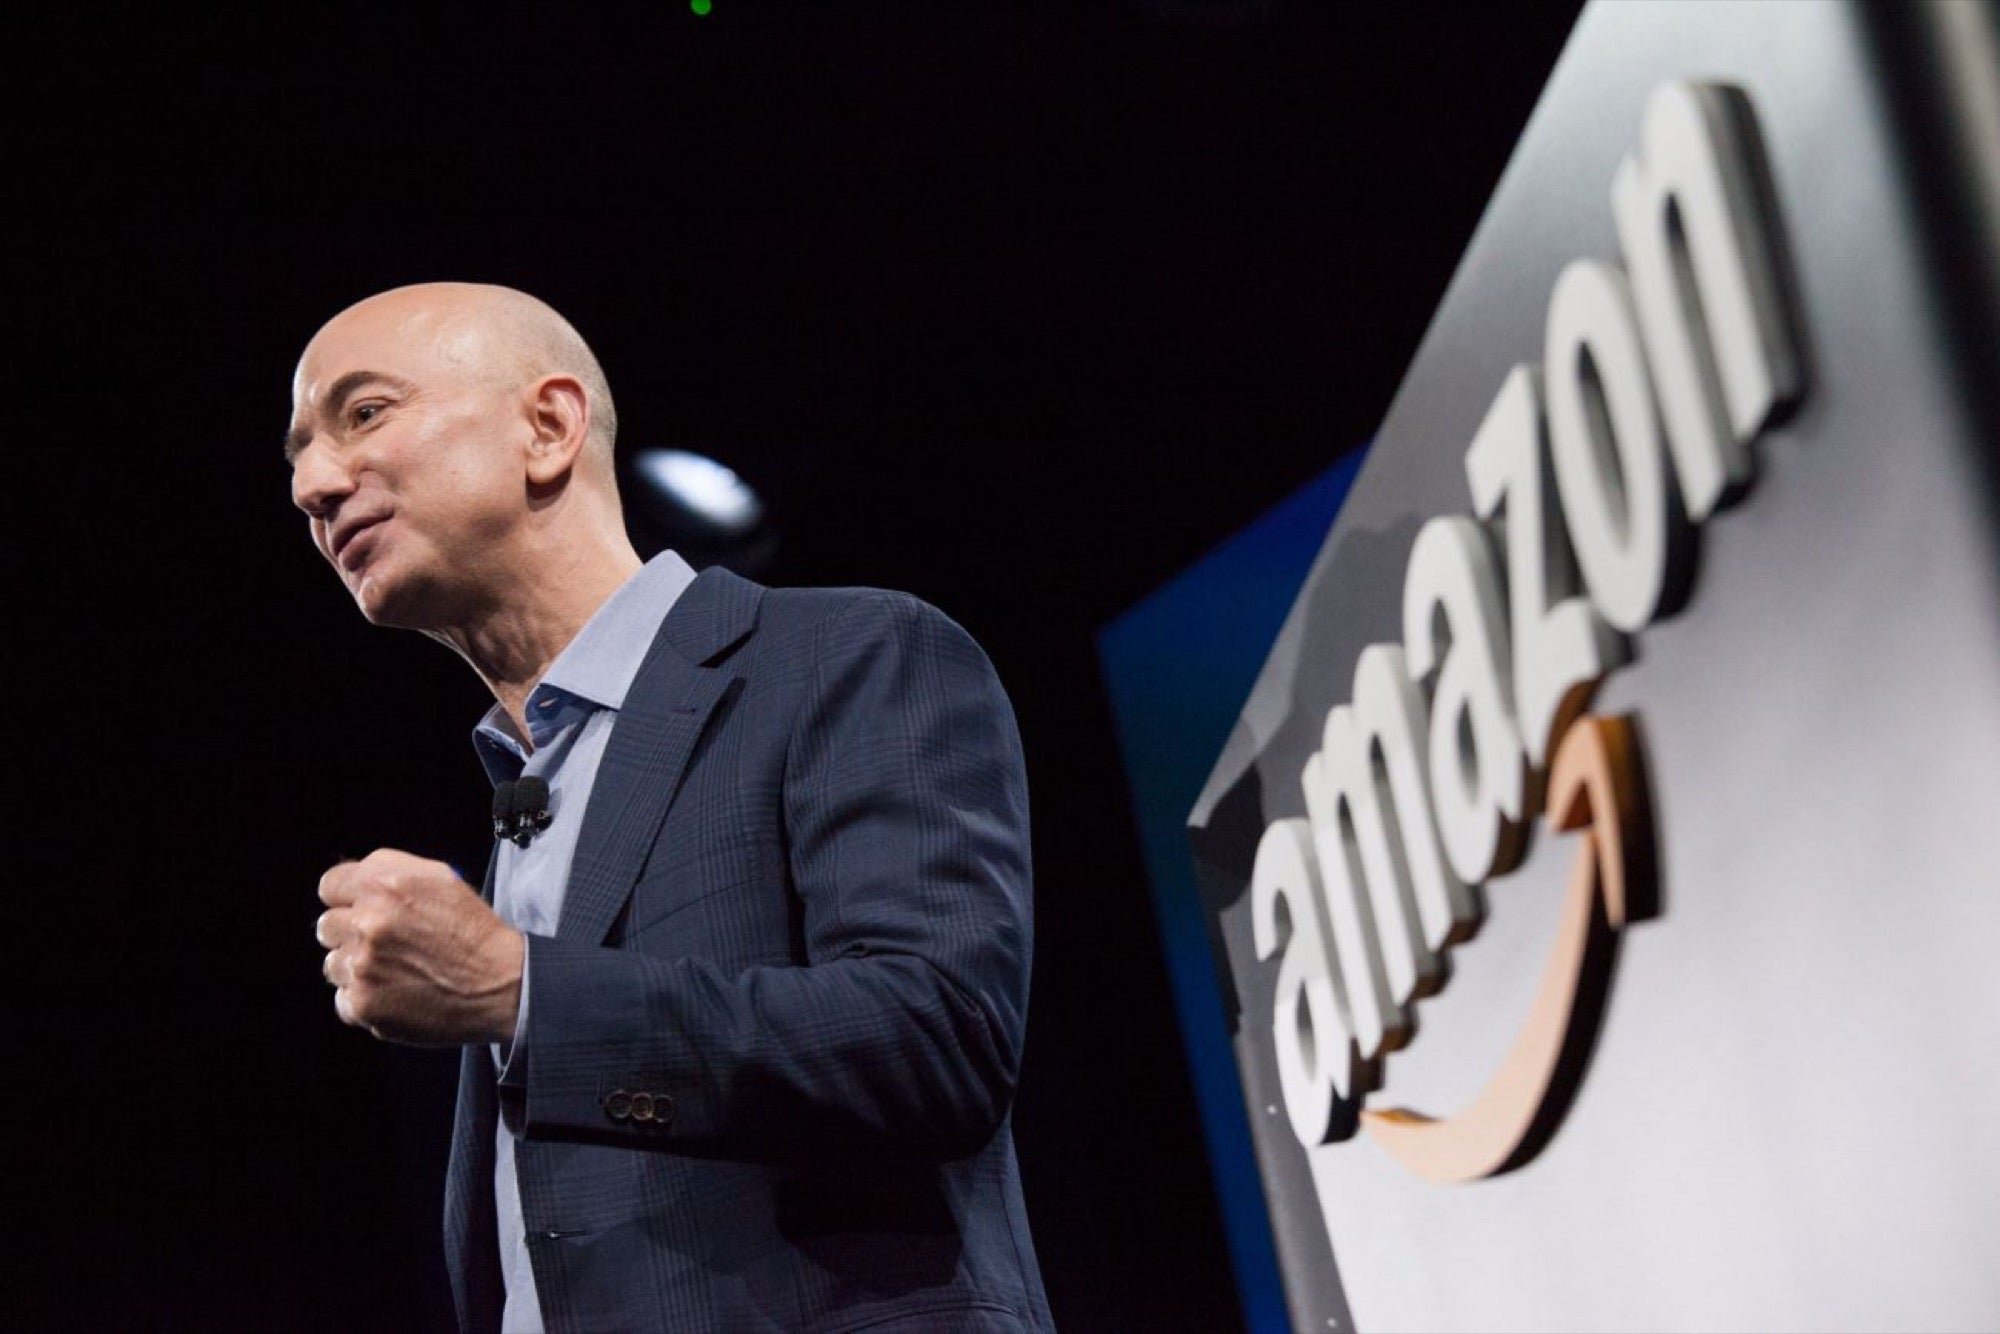 What Is the Secret of Amazon's Huge Success? Jeff Bezos Credits Commitment to These 3 Principles.